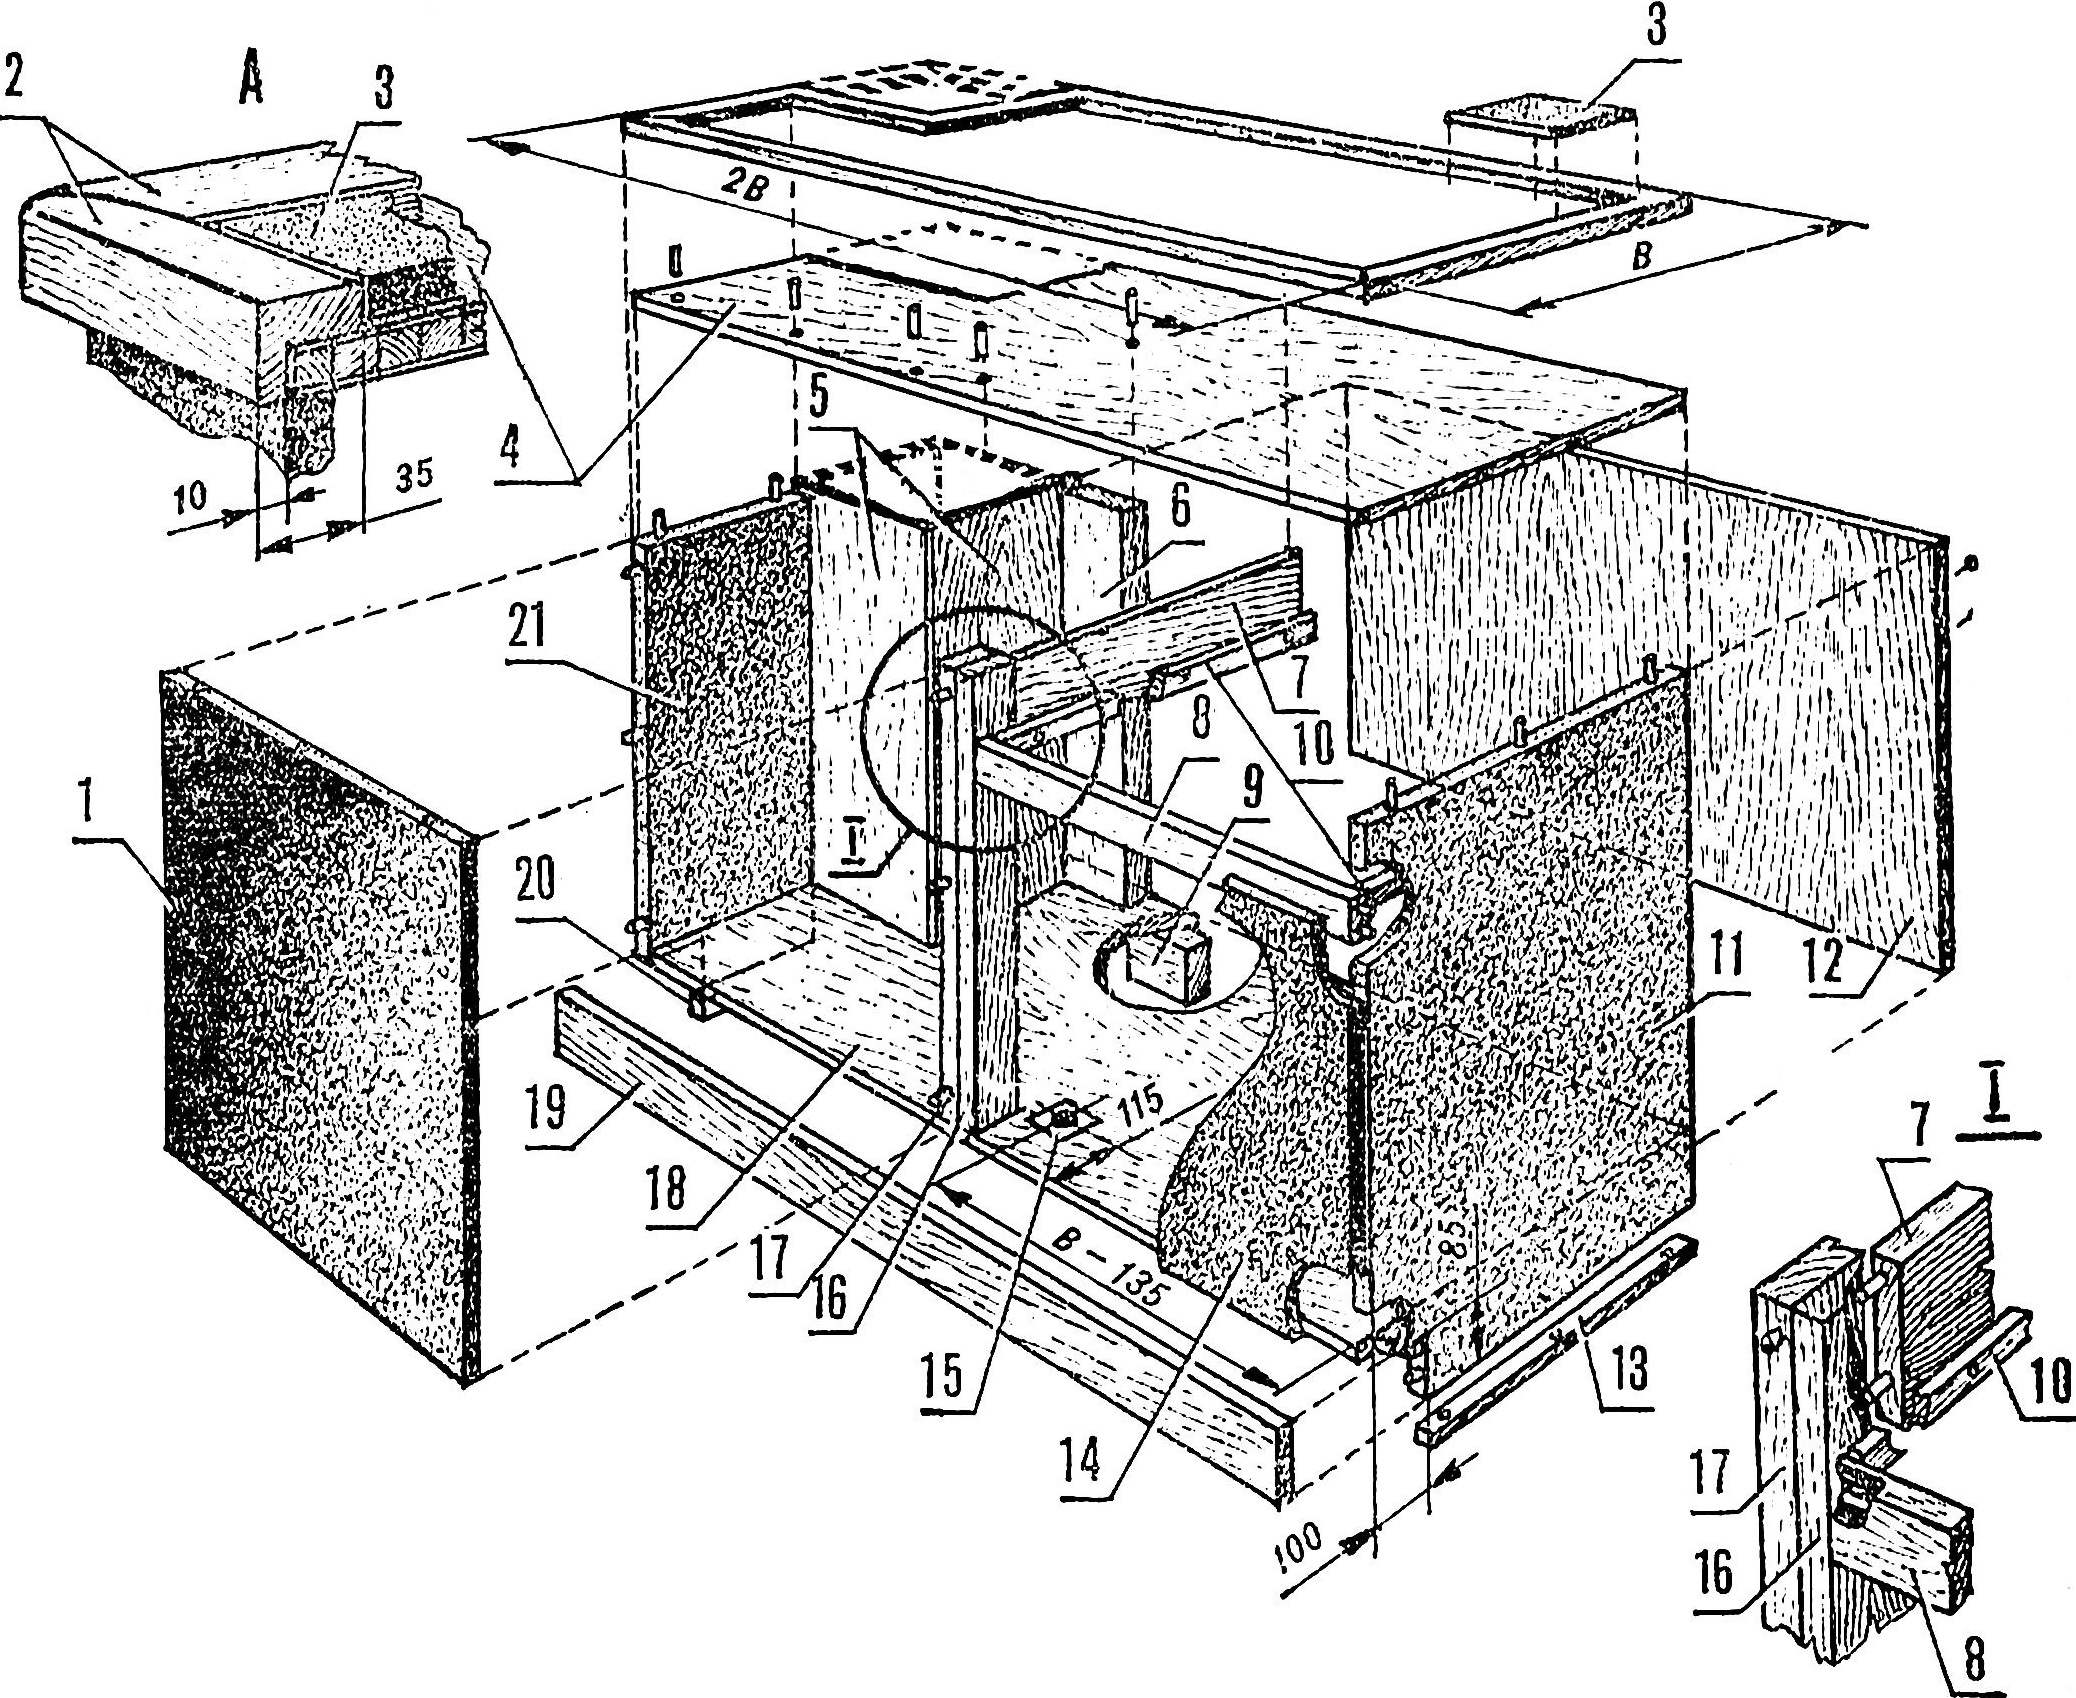 Fig. 2. The body of the table.